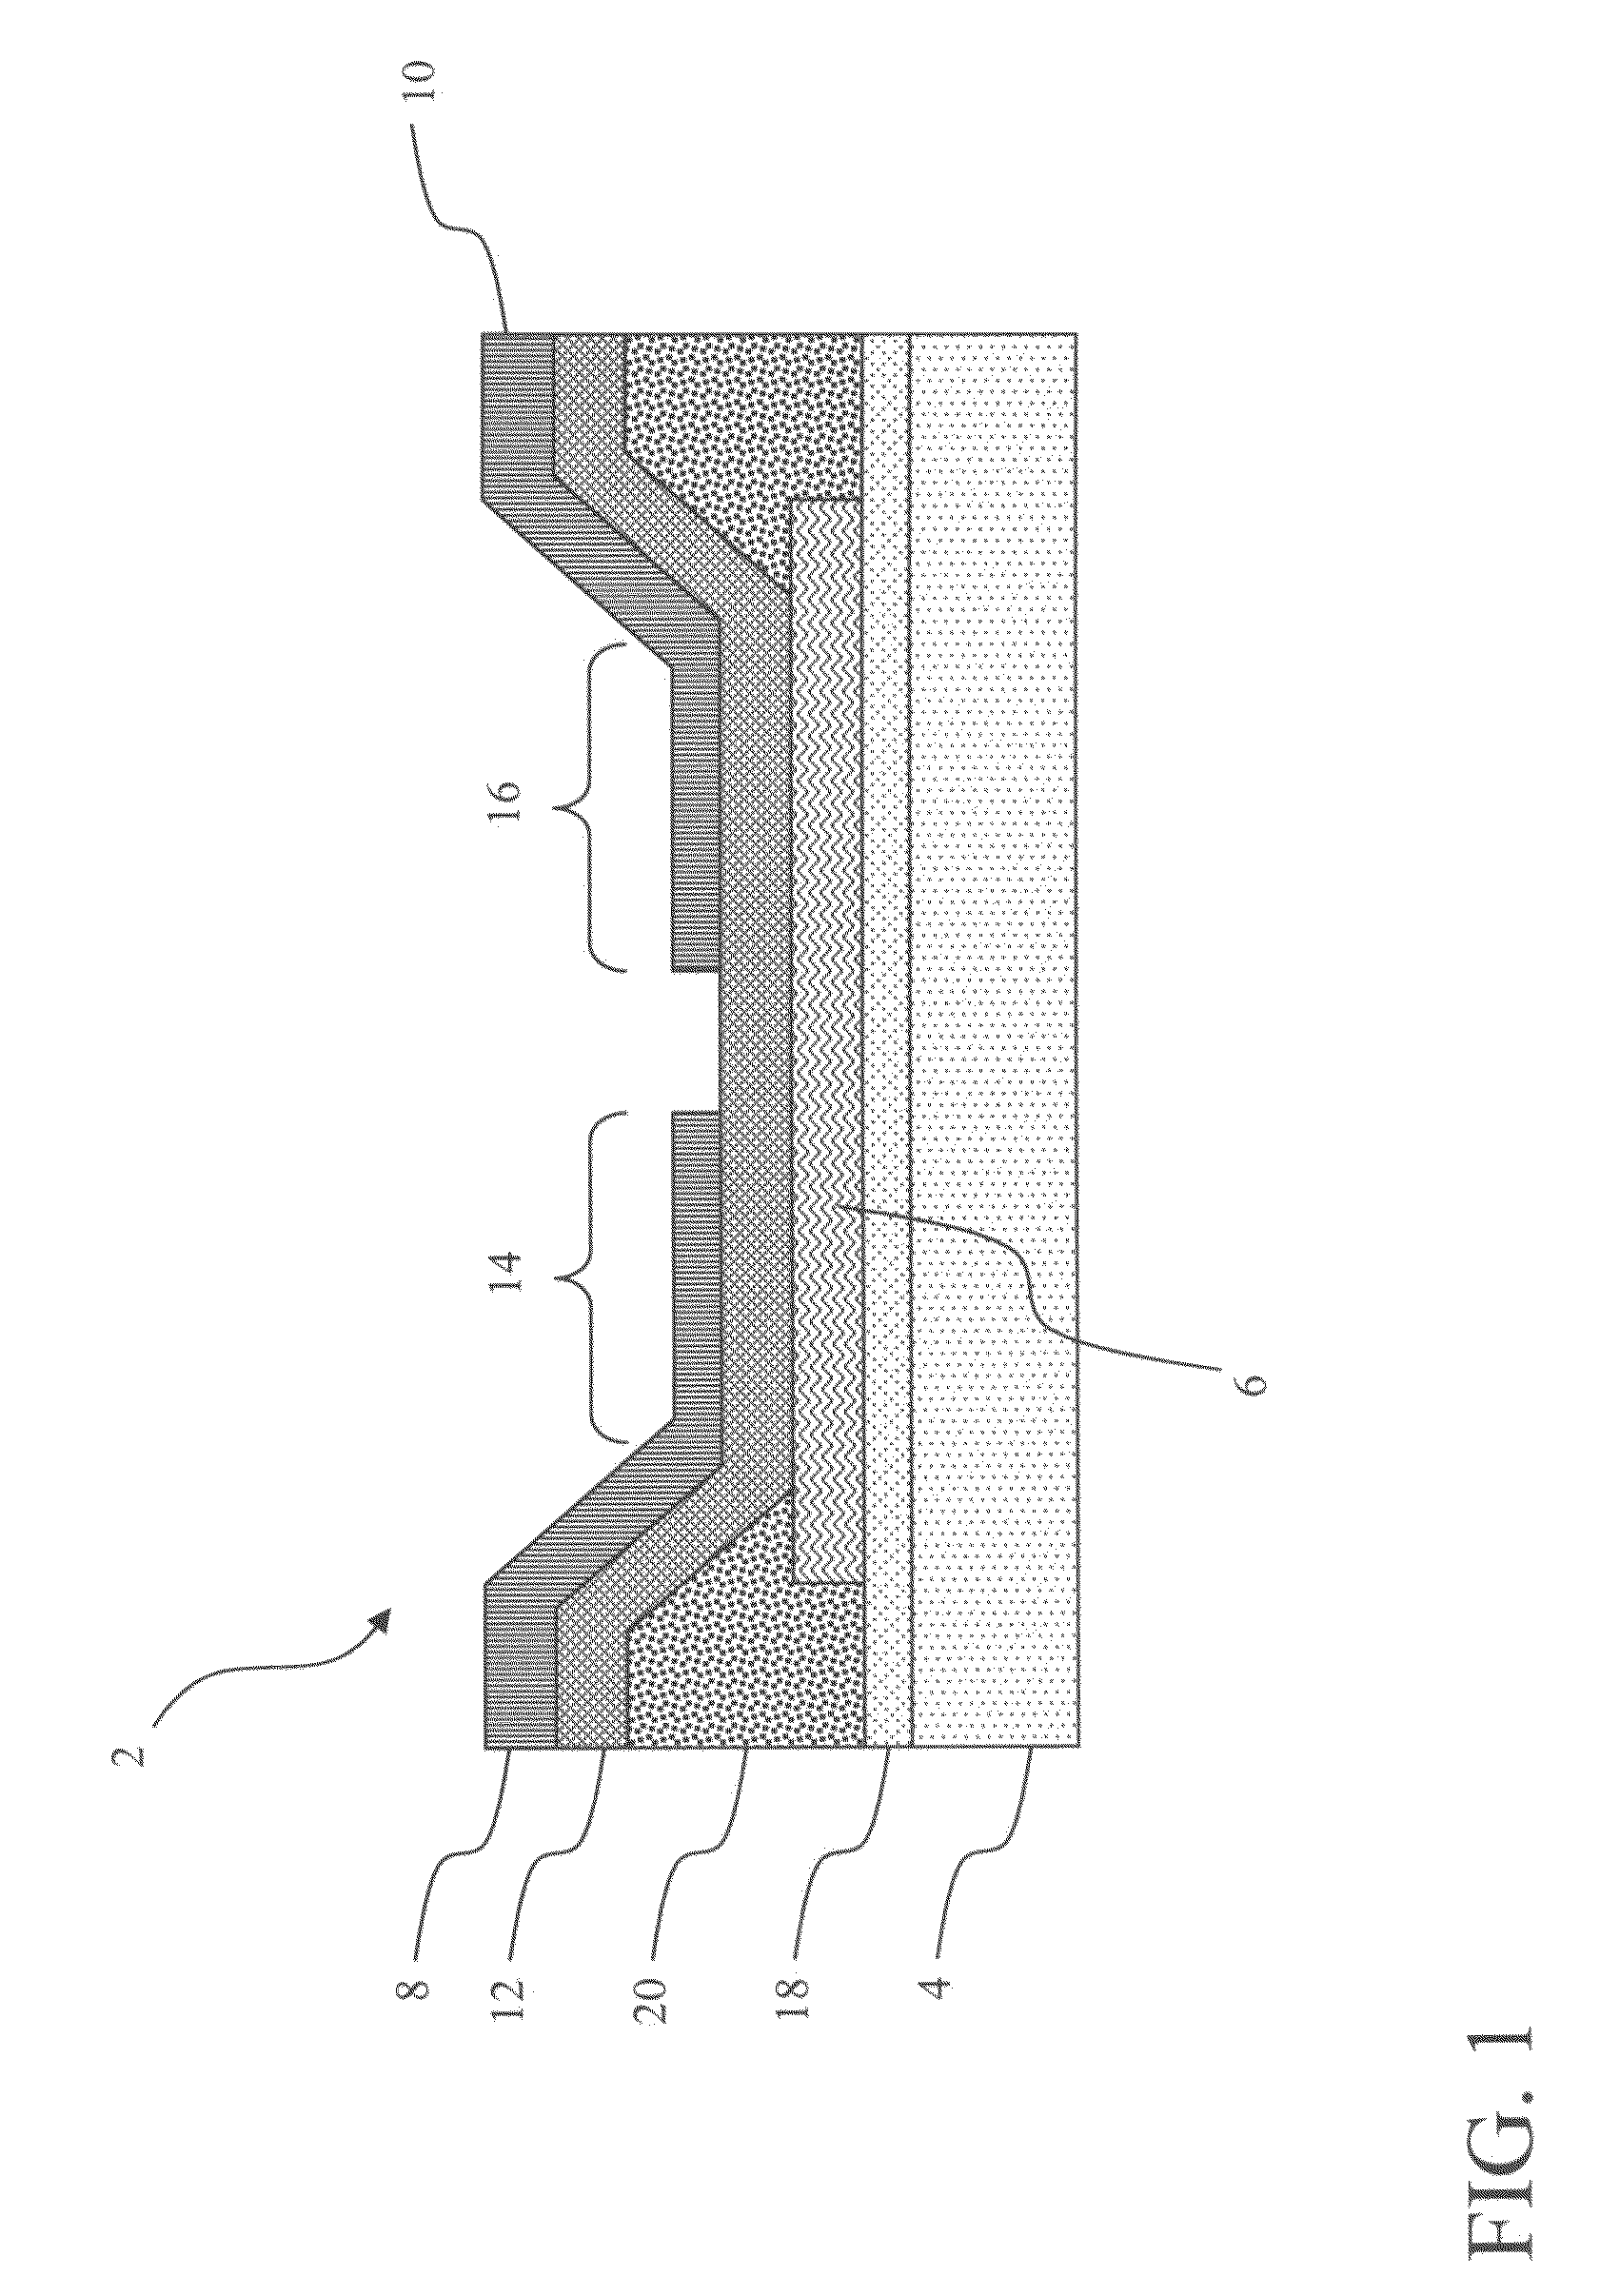 Active matrix electroluminescent display with segmented electrode